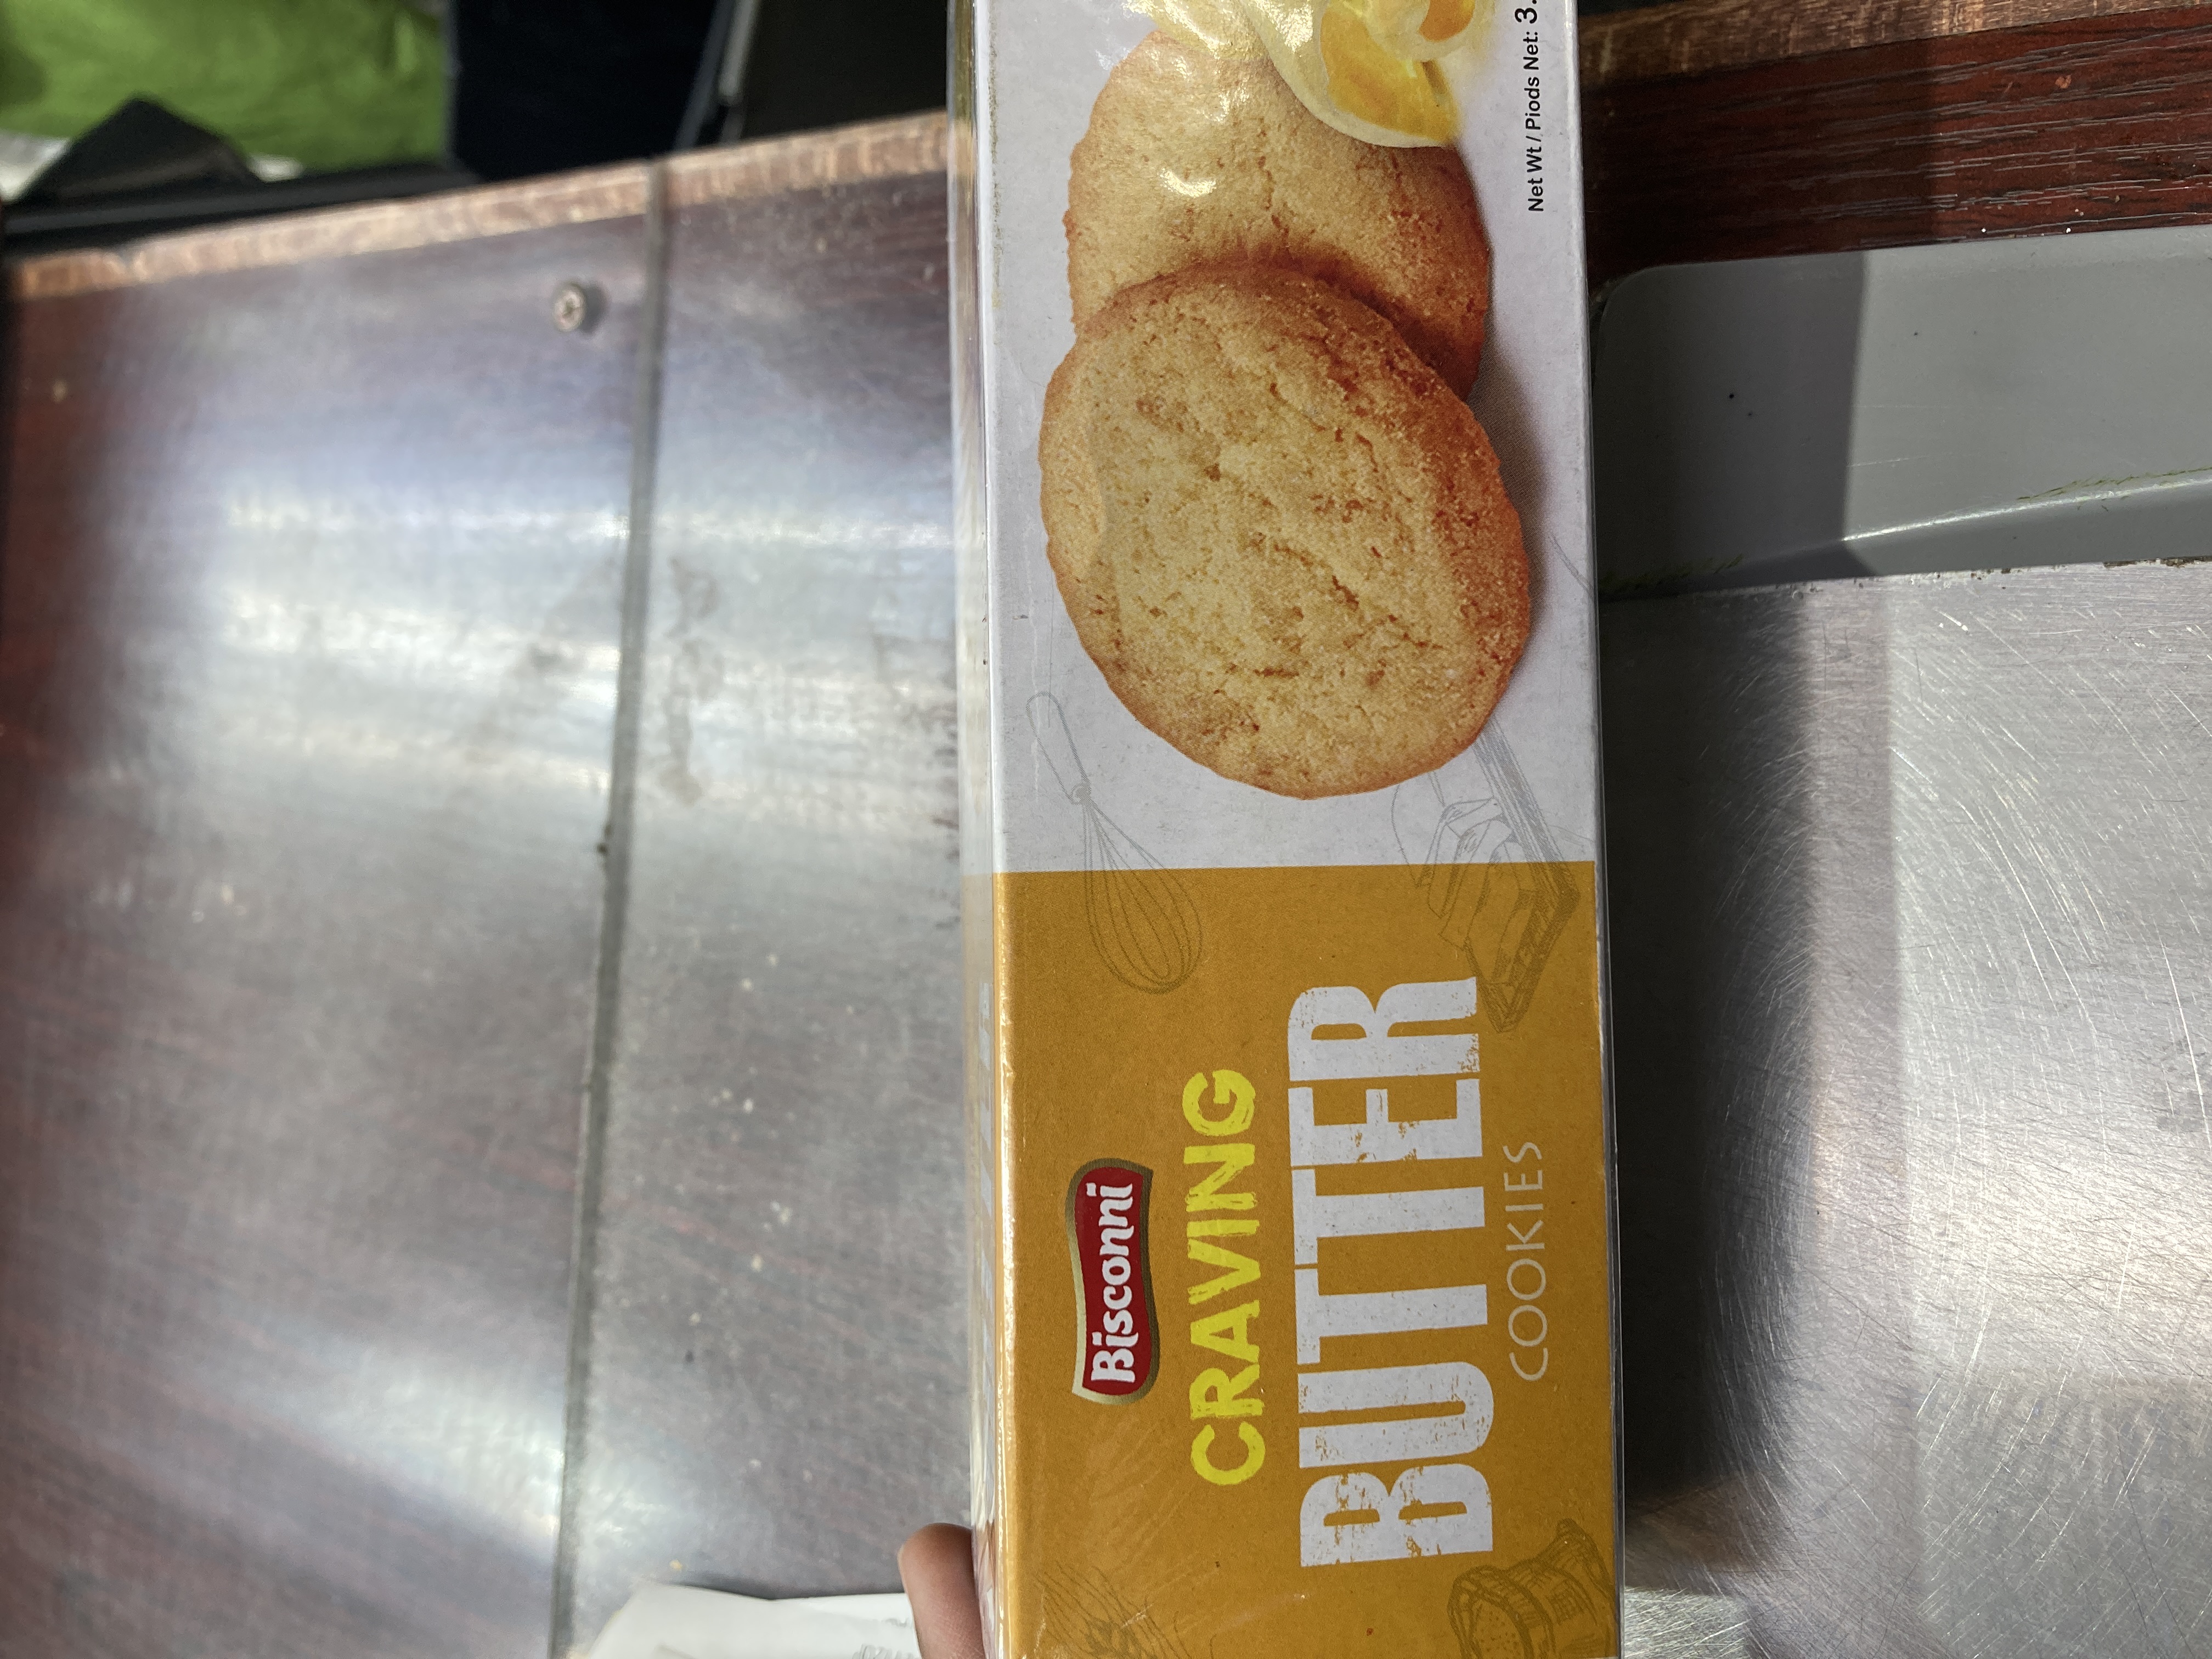 BISCONNI CRAVING BUTTER COOKIES 3.38 oz